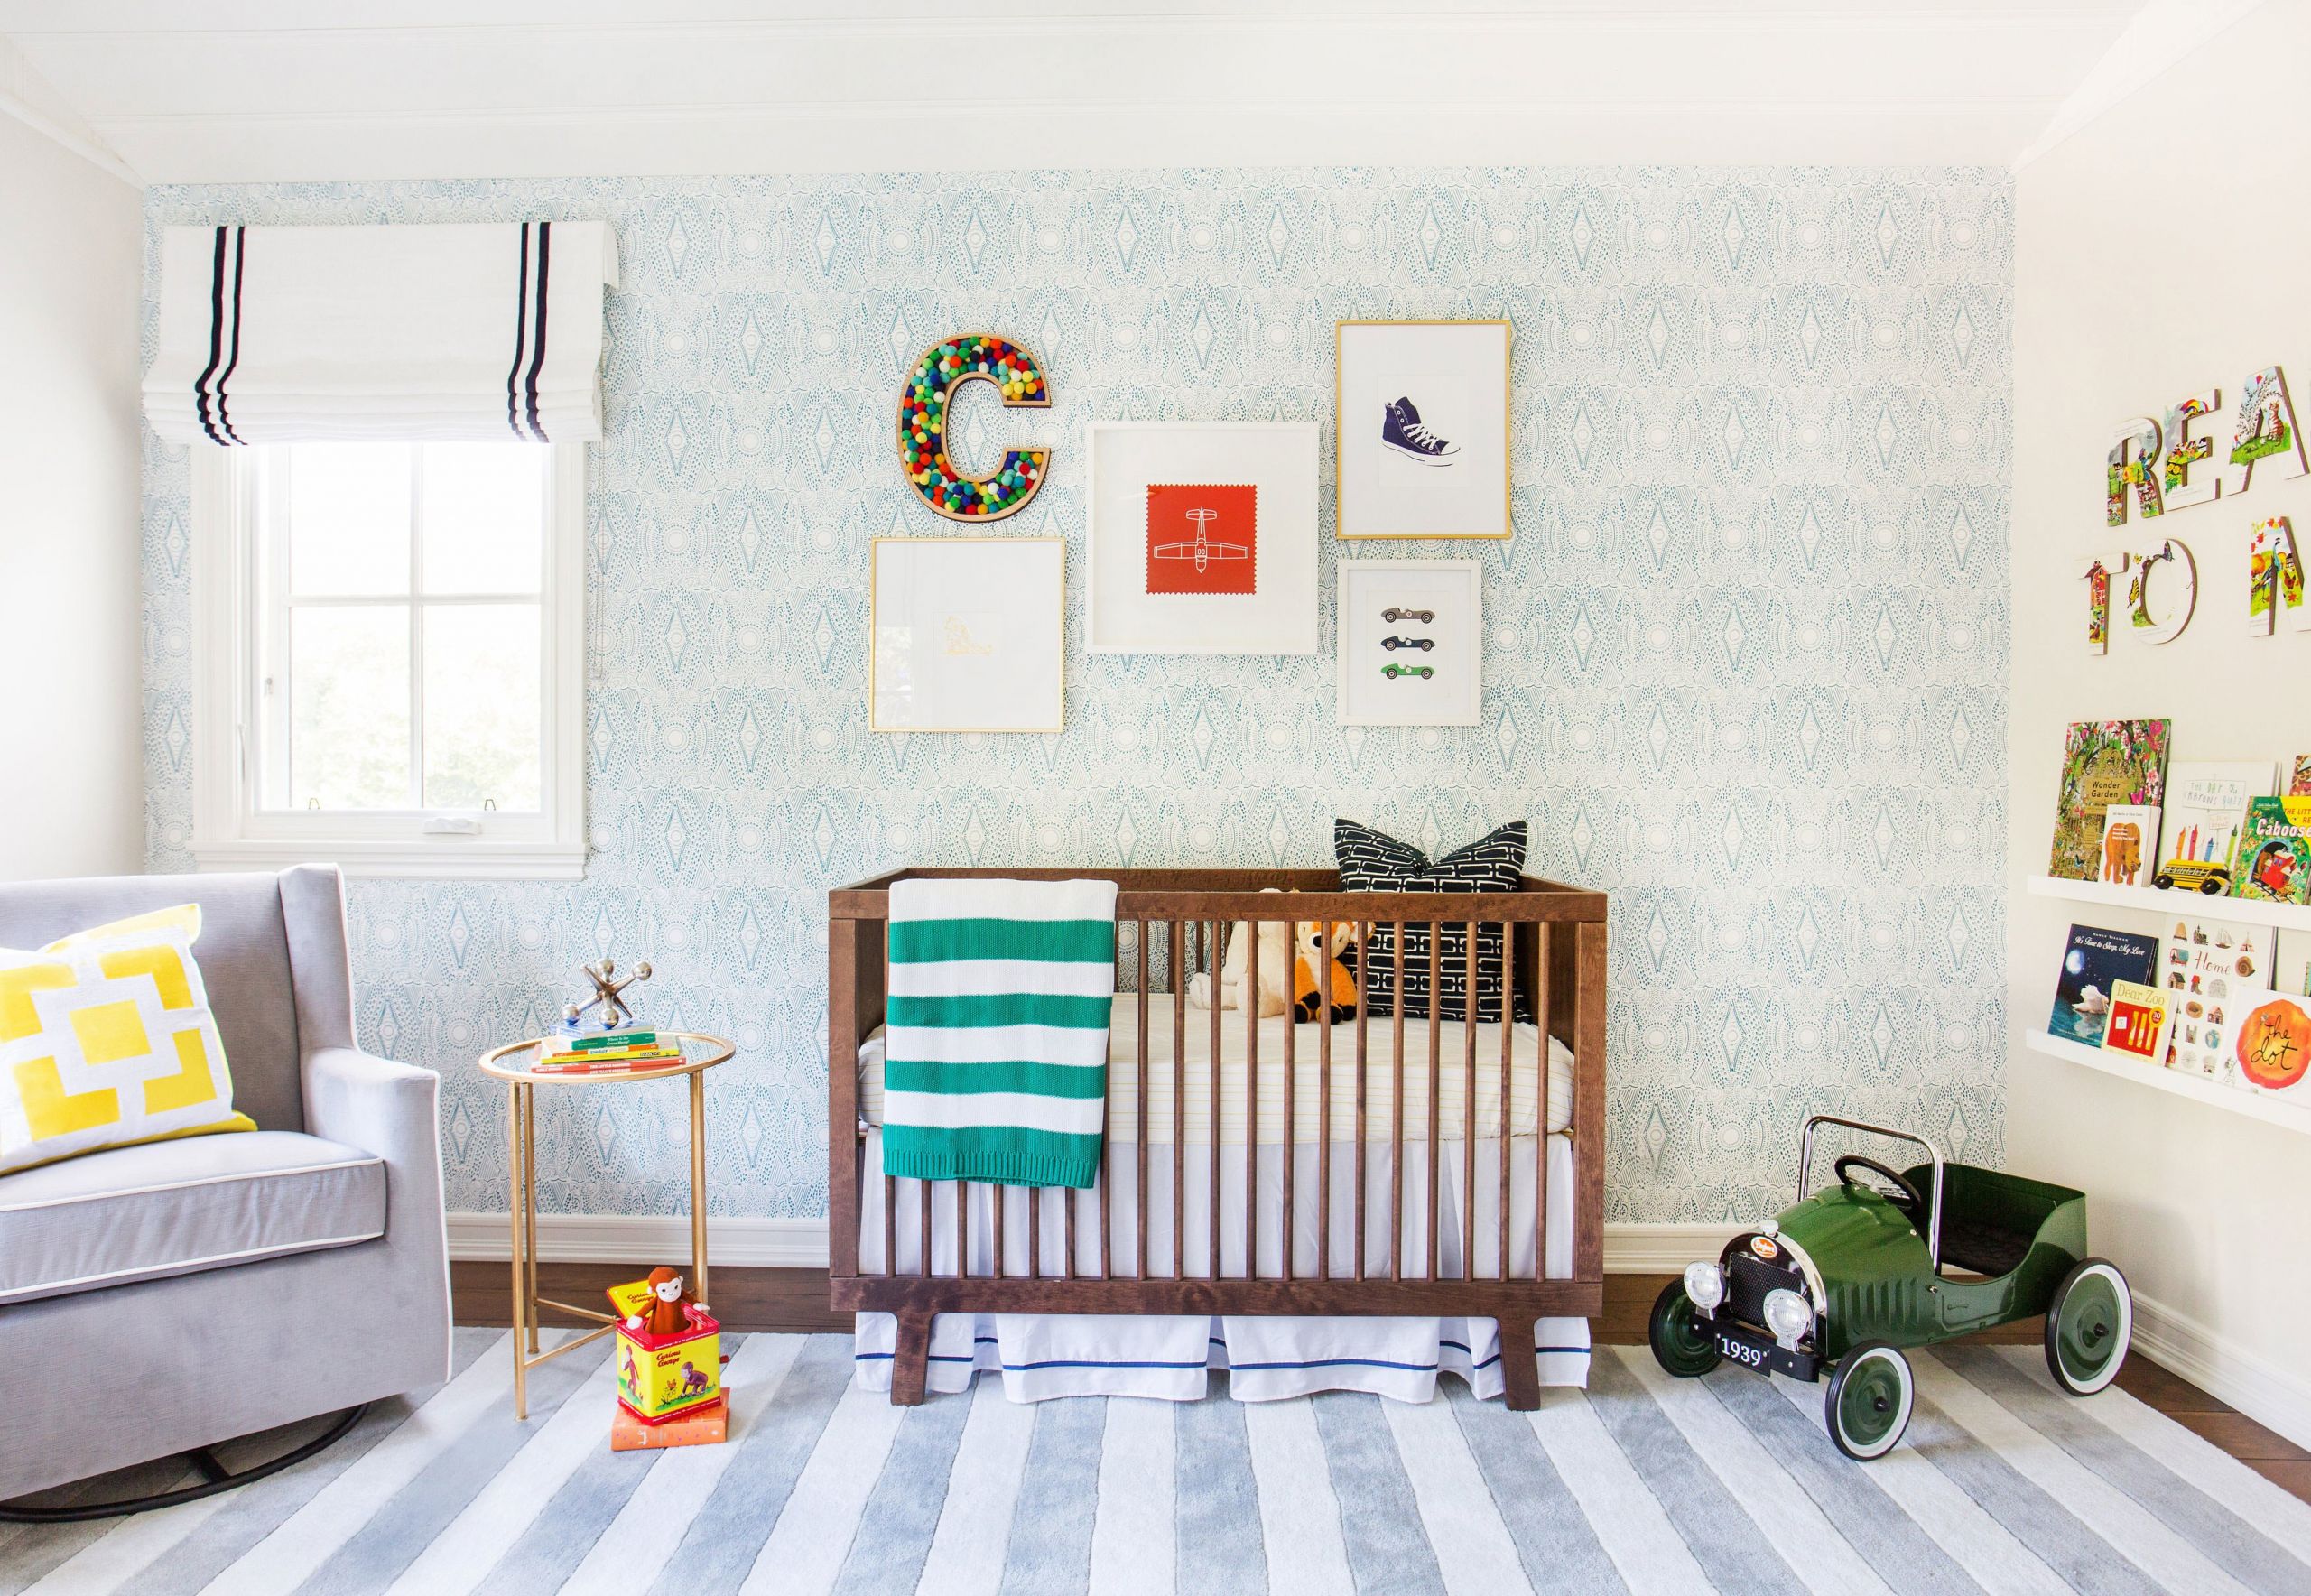 Kids Room Wall Ideas
 3 Wall Decor Ideas Perfect for Kids’ Rooms s